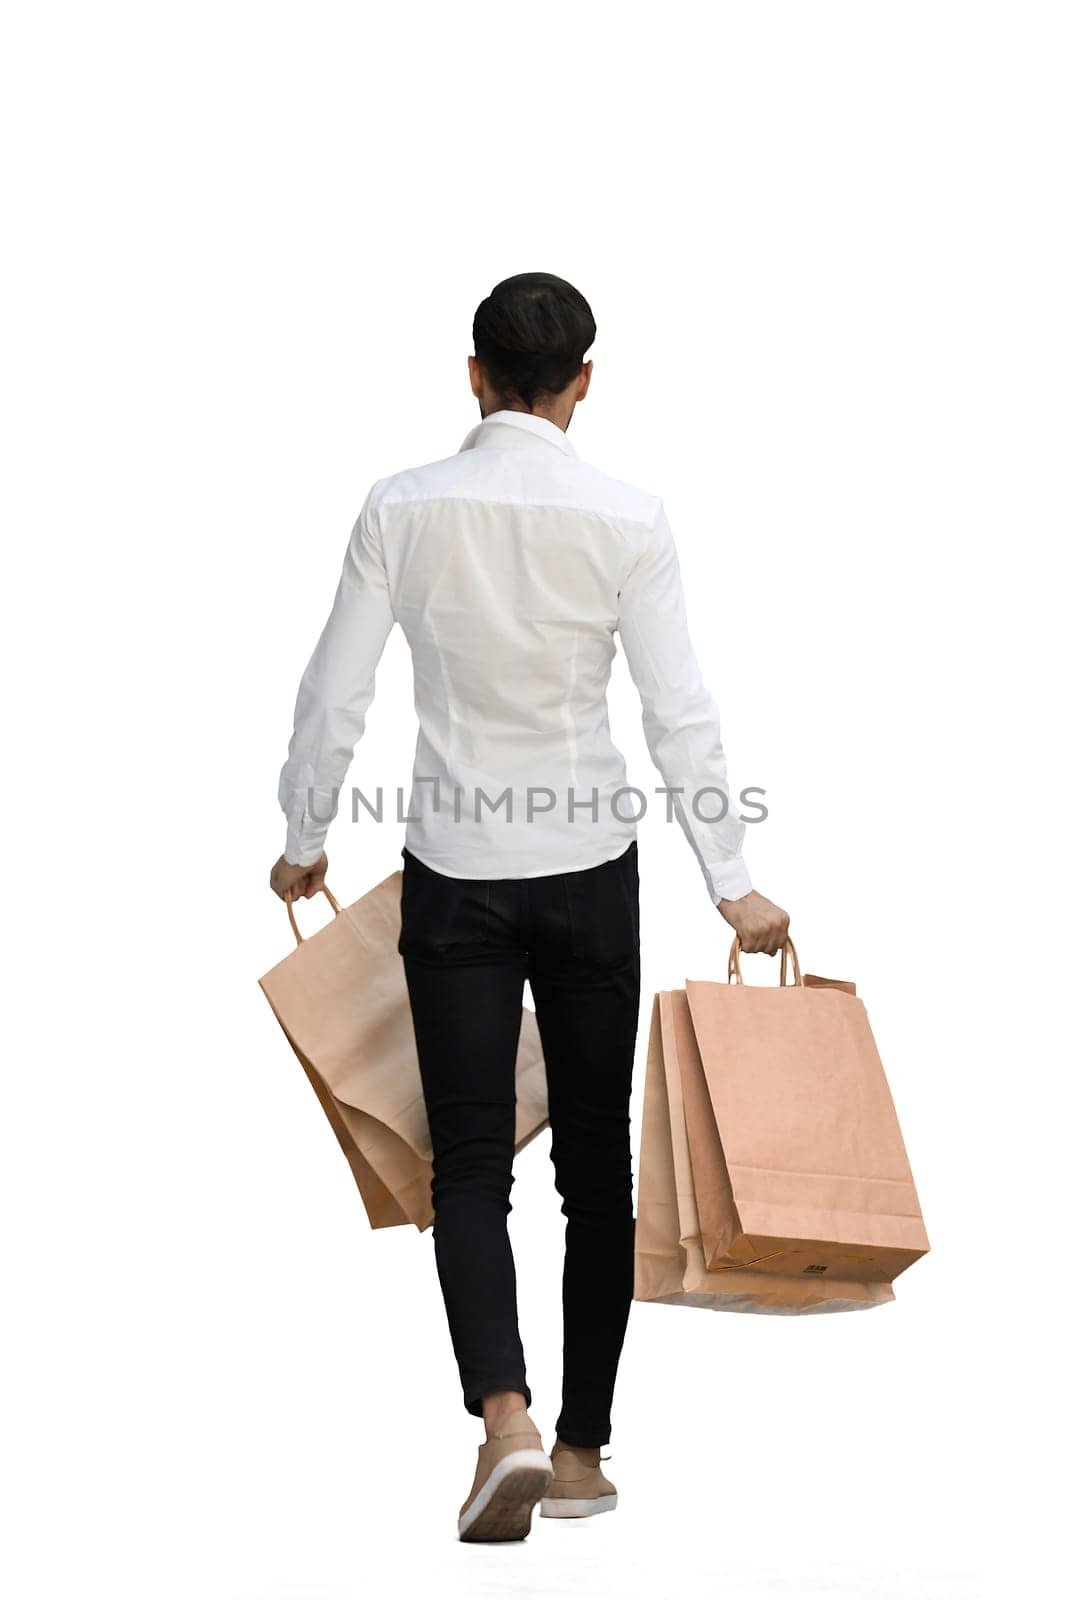 Man on a white background with shoppers, back view.